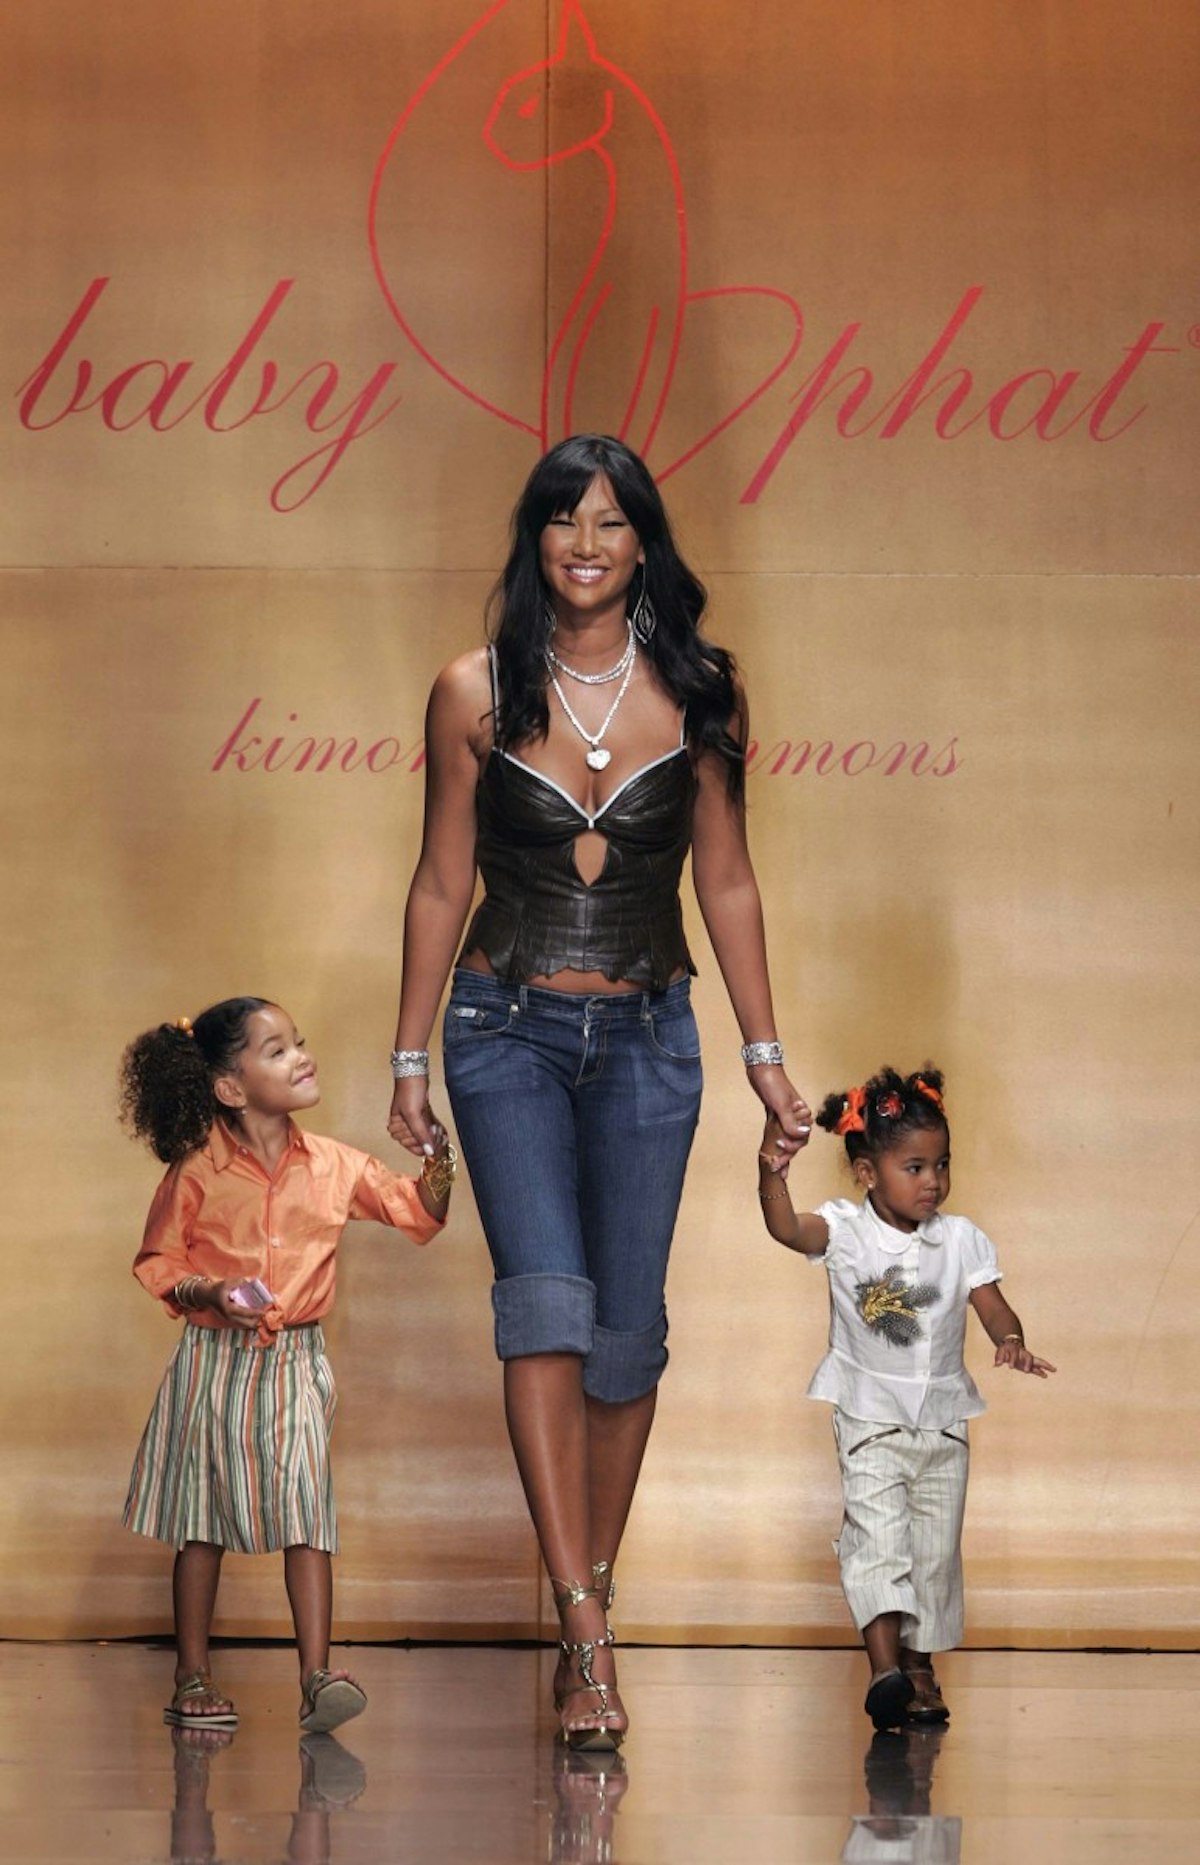 https://www.datocms-assets.com/39109/1620138937-kimora-lee-simmons-baby-phat-family.jpeg?auto=format&fit=max&w=1200